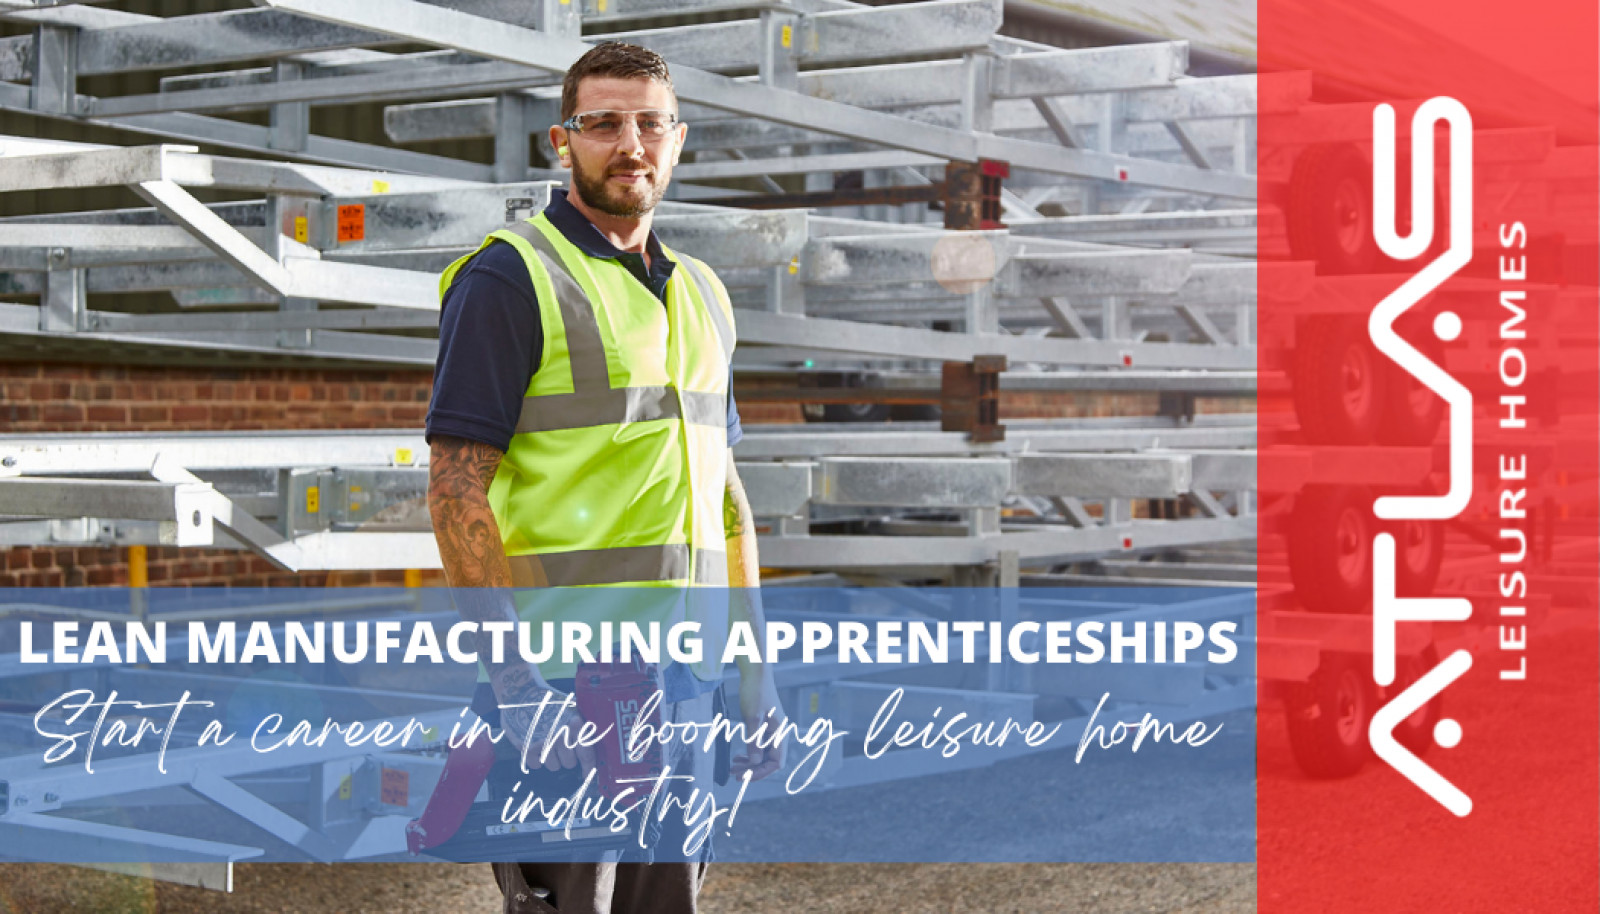 LEAN MANUFACTURING APPRENTICESHIPS AT ATLAS LEISURE HOMES